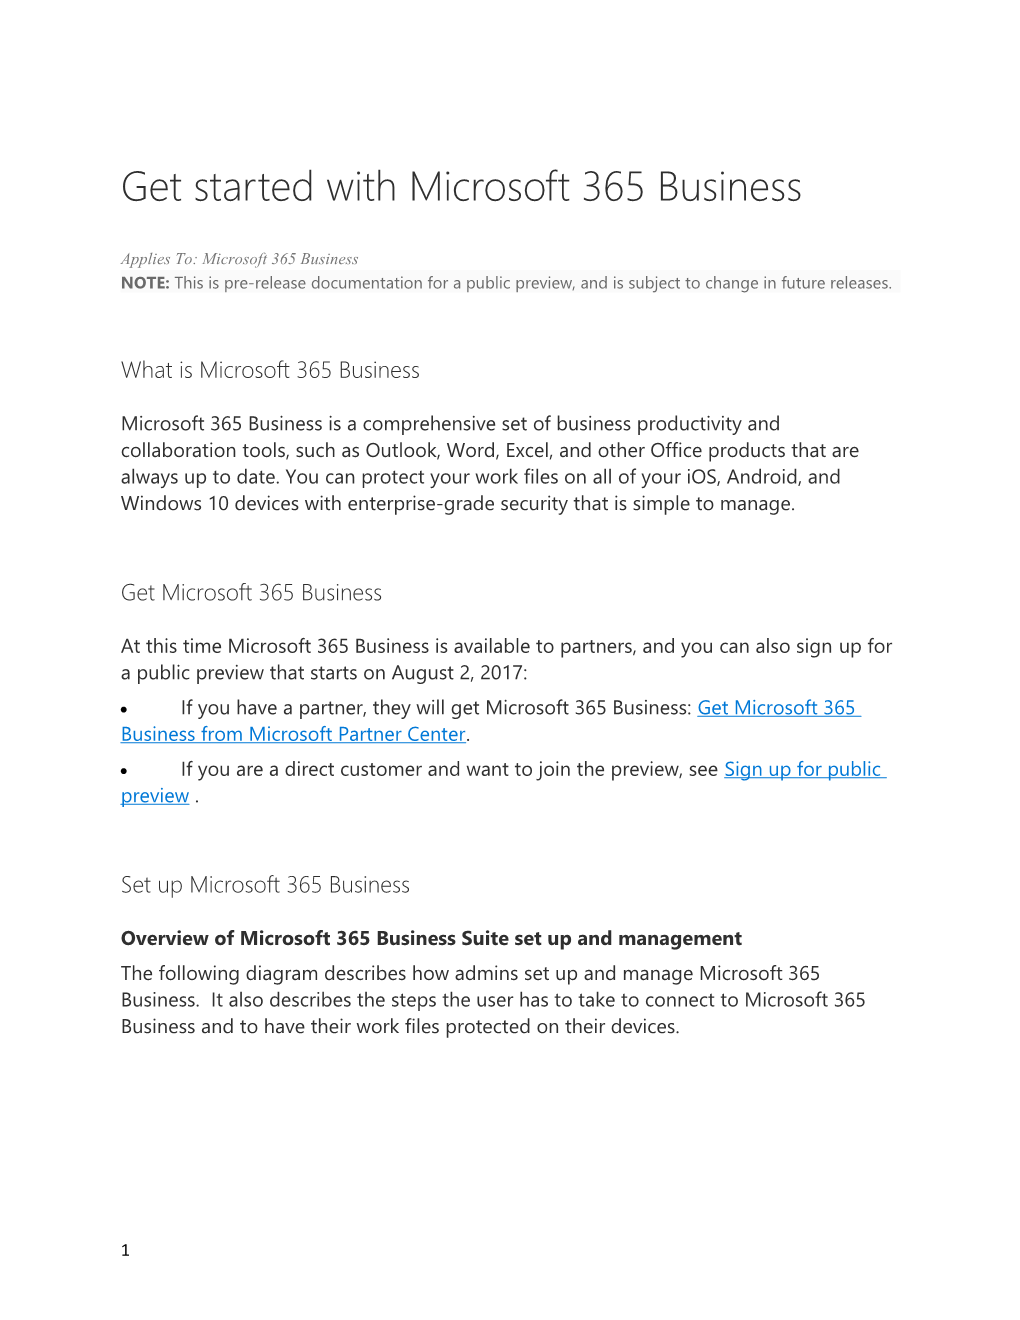 Get Started with Microsoft 365 Business